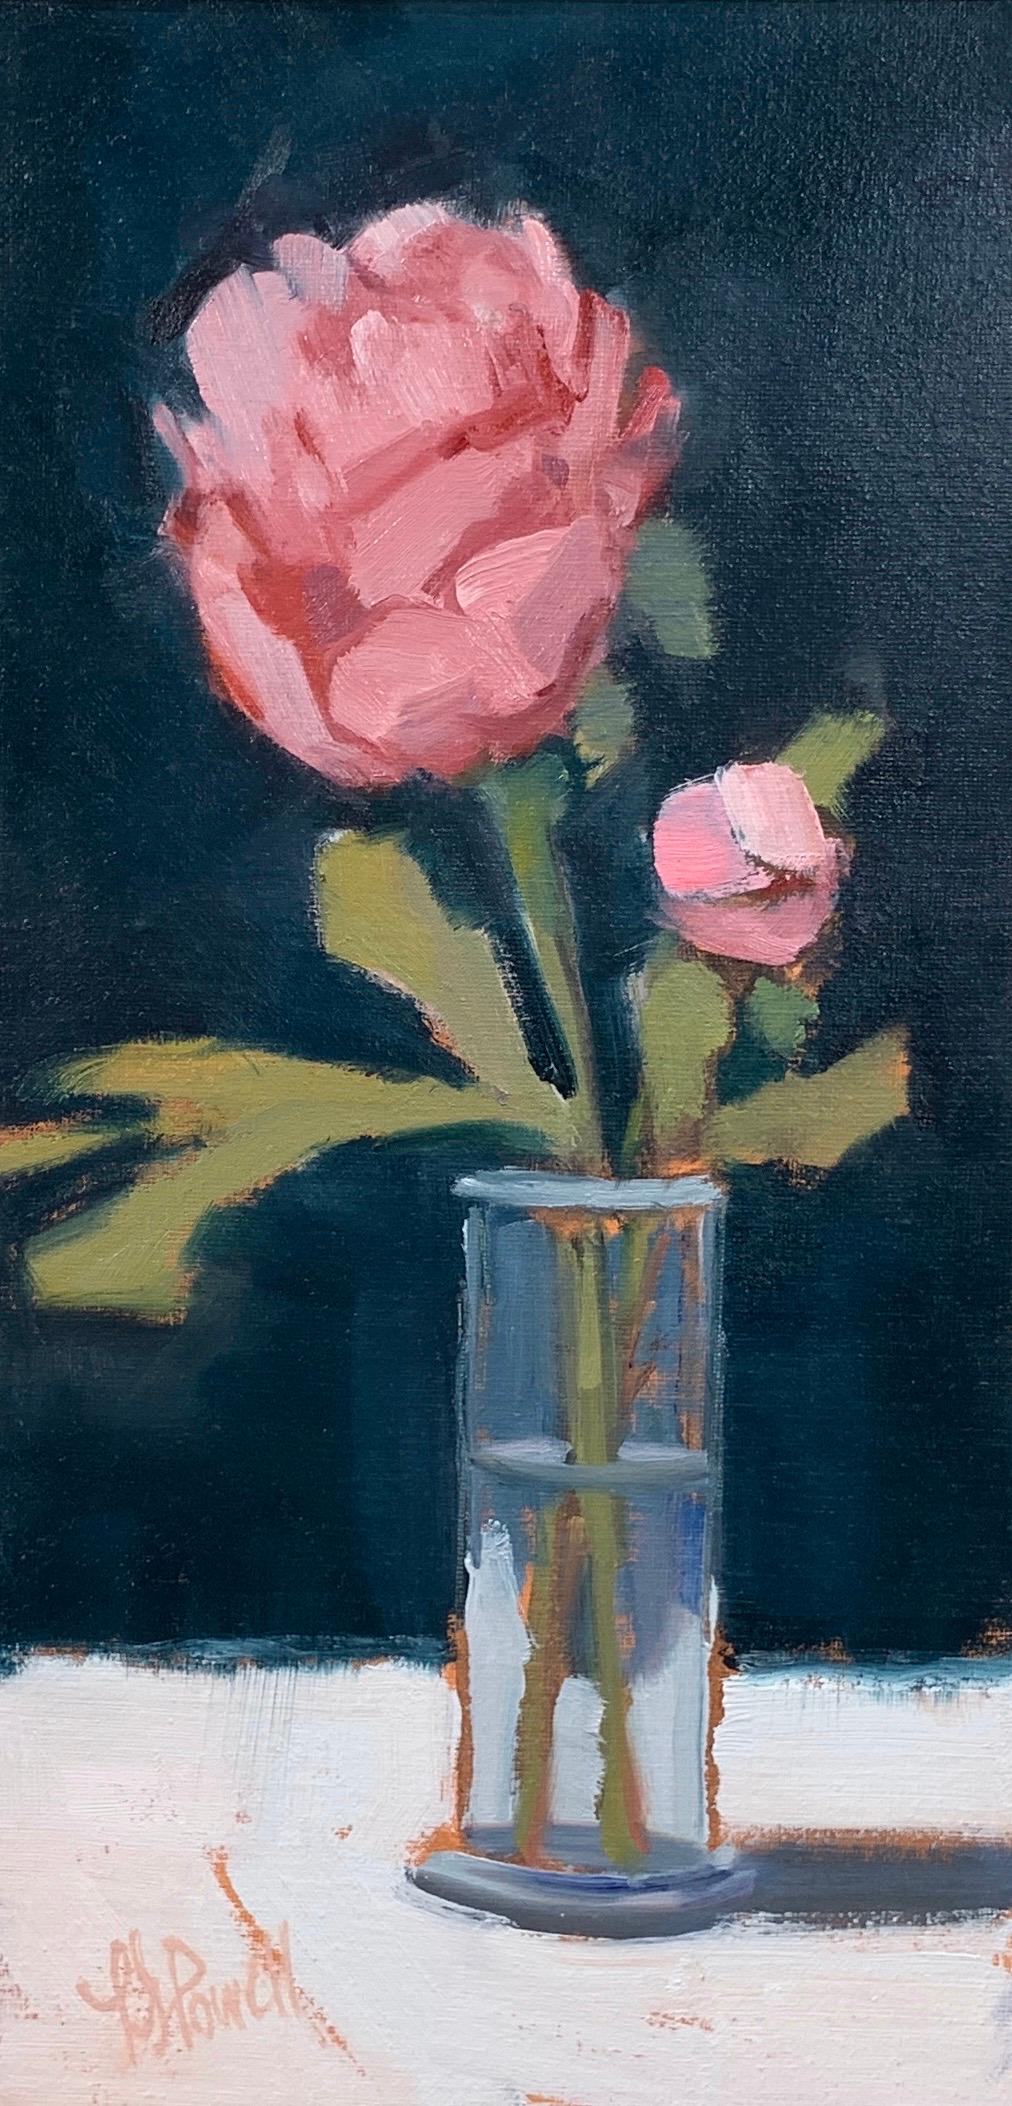 'Peonies in Bud Vase' is a small oil on board Post-Impressionist floral still-life painting created by American artist Lesley Powell in 2020. Featuring a palette made of black, pink, green and white tones, the painting depicts a delicate peony